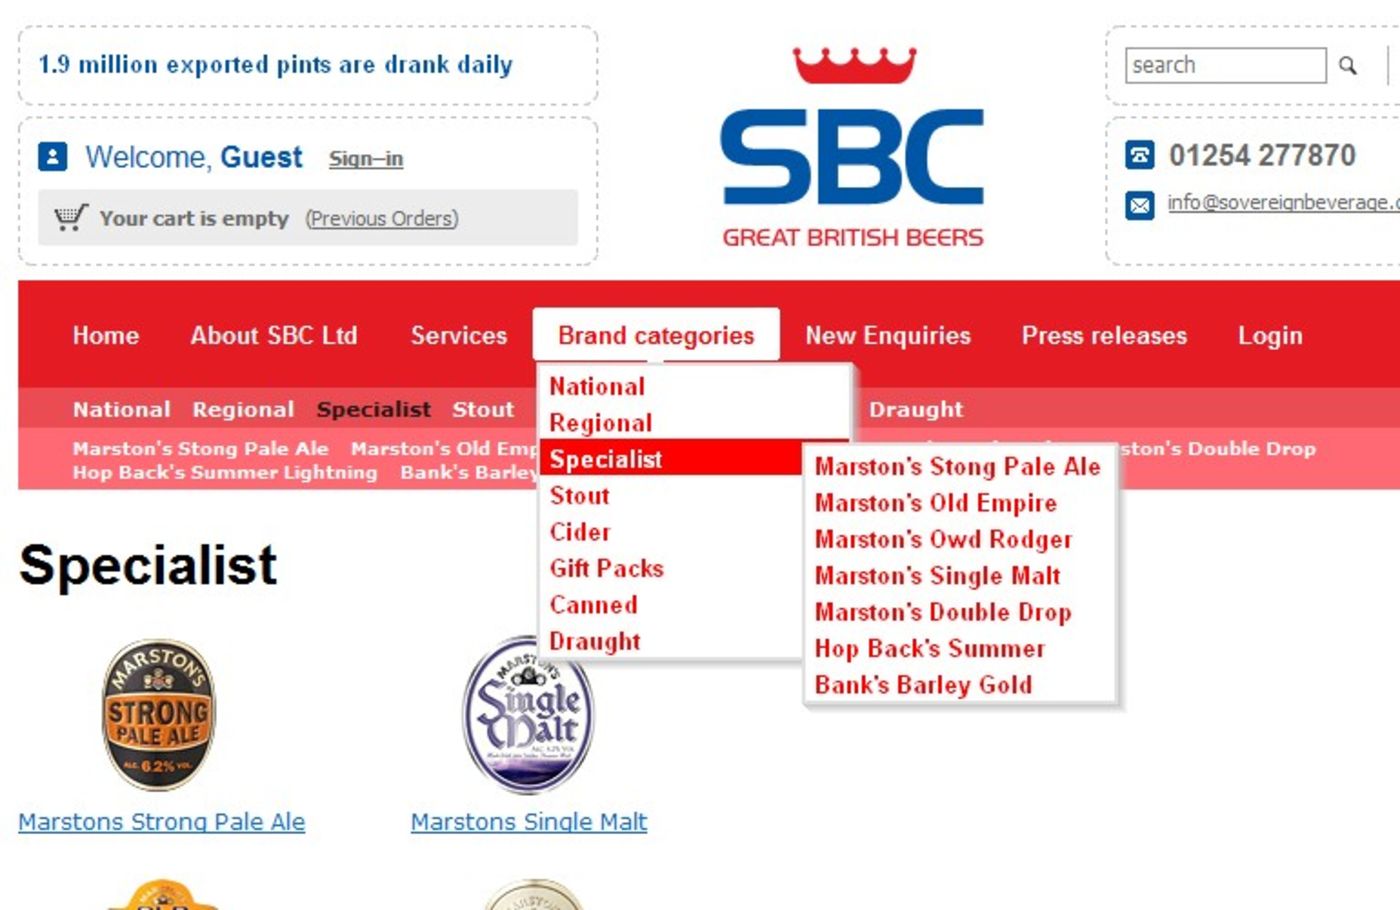 Sovereign Beverage Company Brand categories